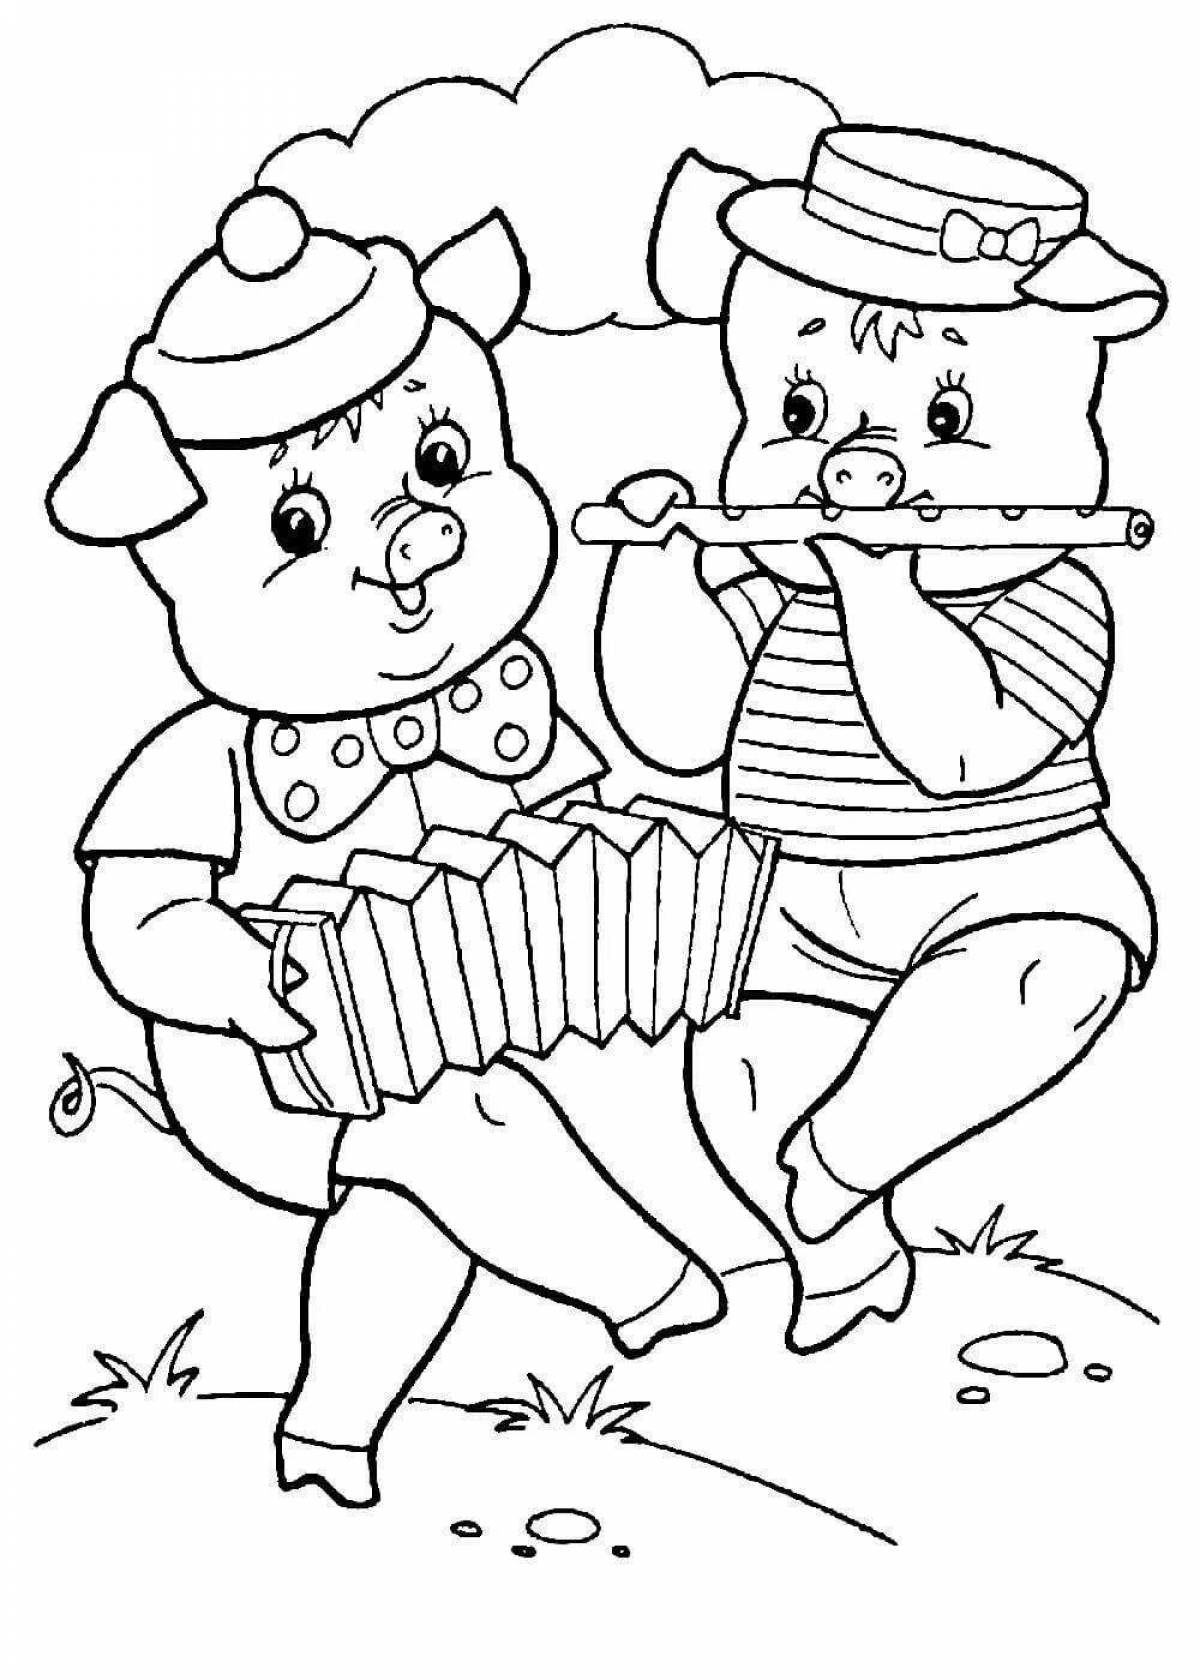 Adorable Three Little Pigs Coloring Book for Preschoolers